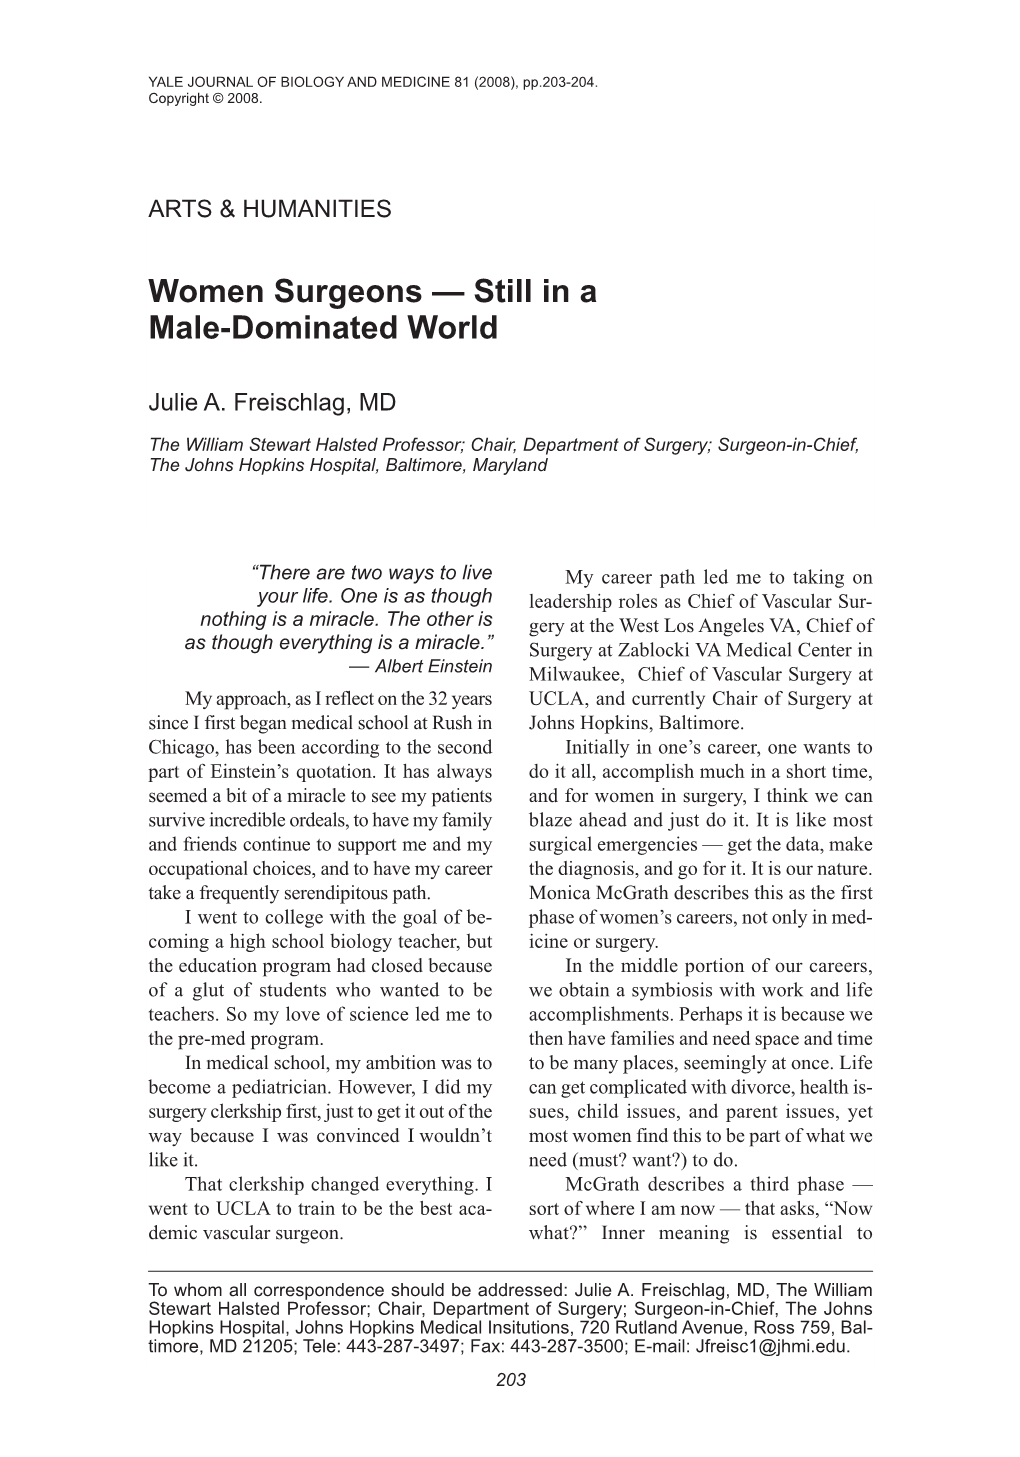 Women Surgeons — Still in a Male-Dominated World